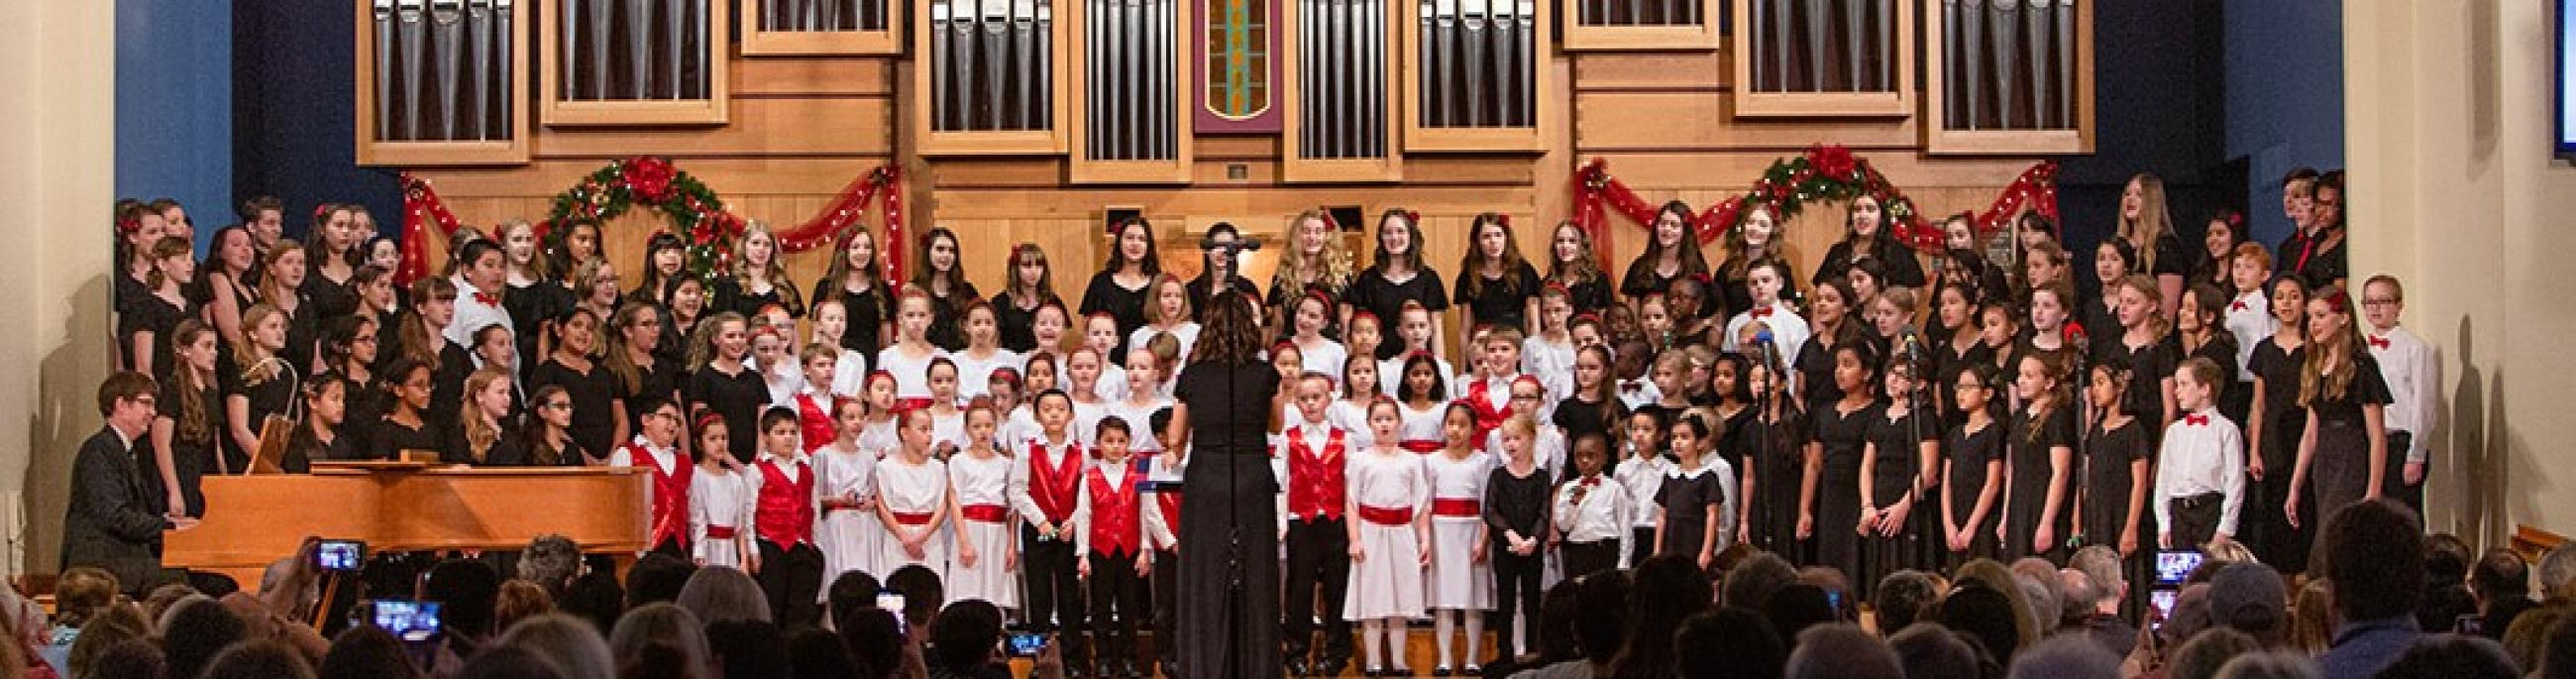 A large group of children stand on risers in front of a church organ as they sing.